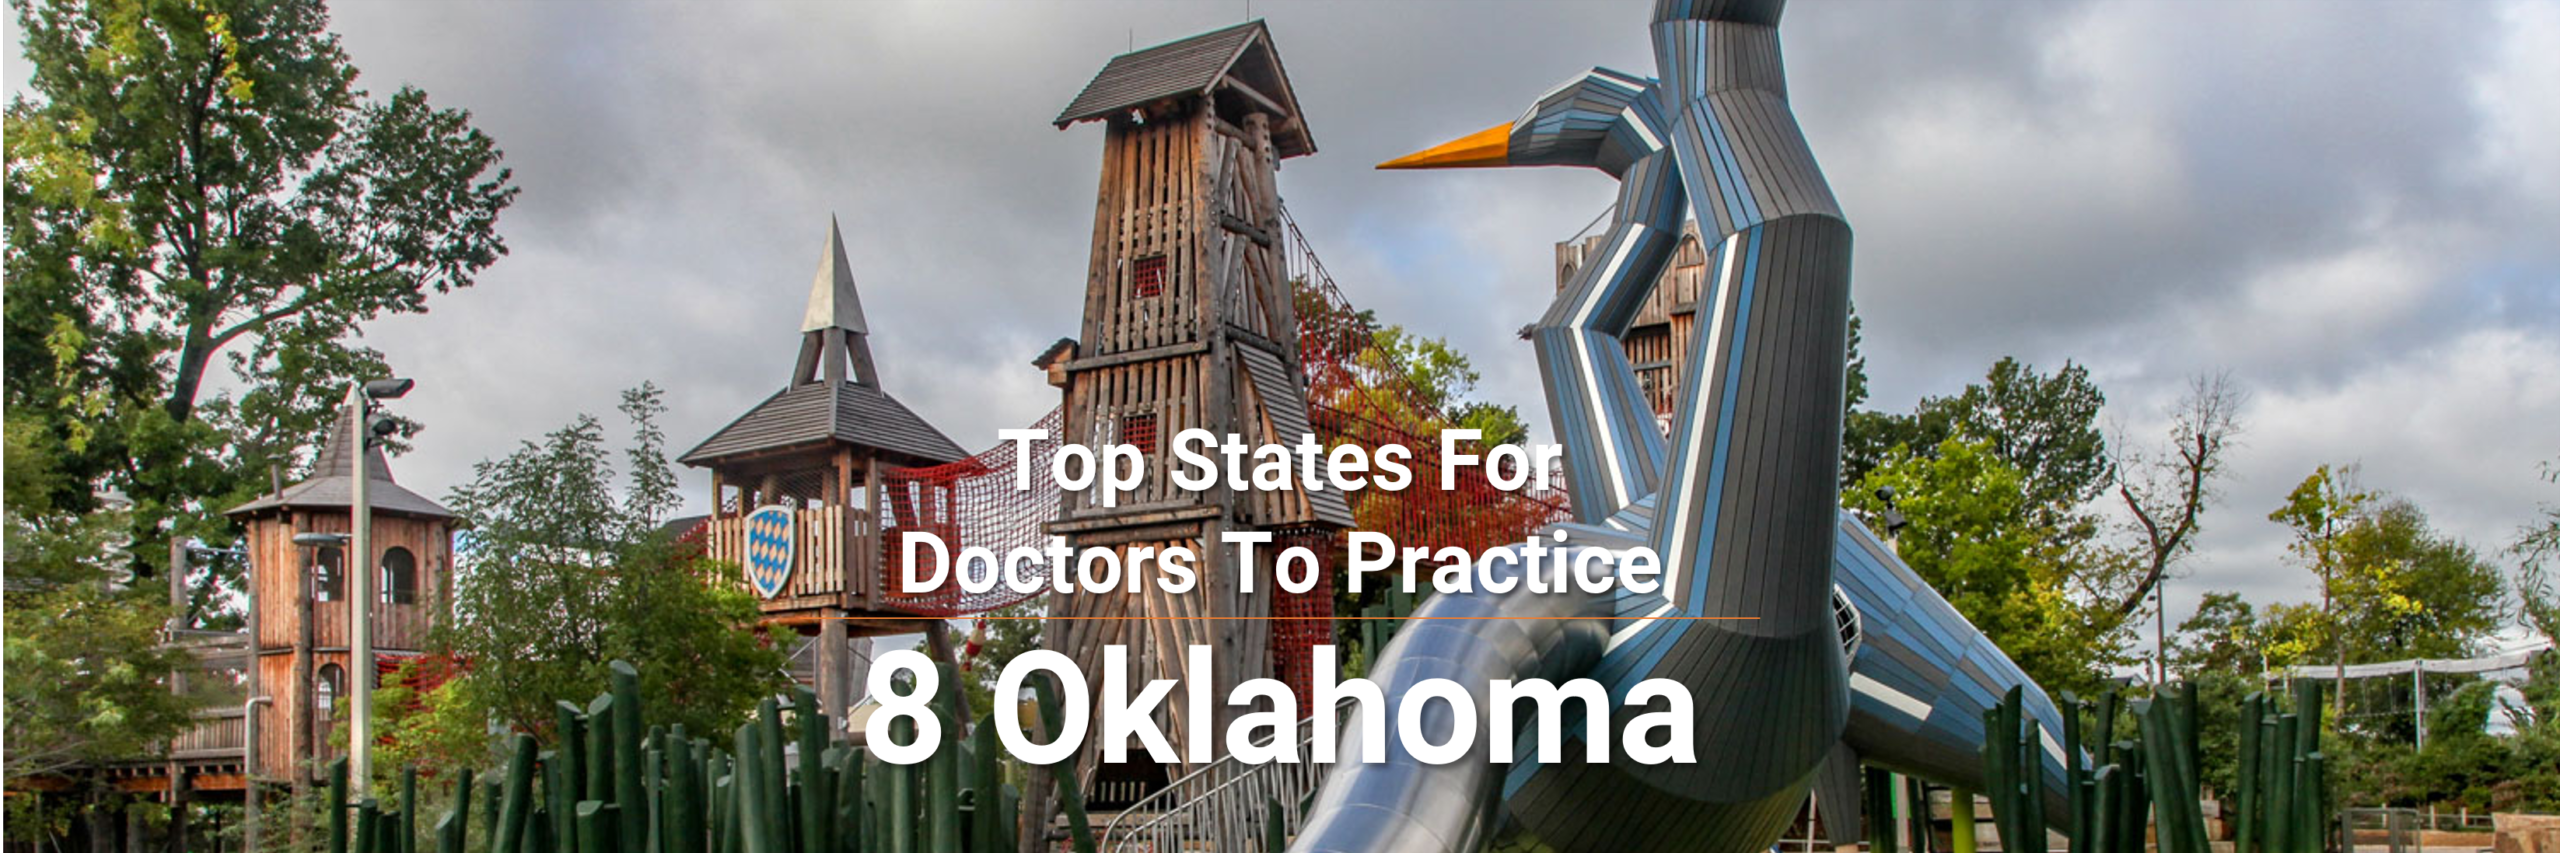 Top States for Doctors to Practice 8 Oklahoma 2023